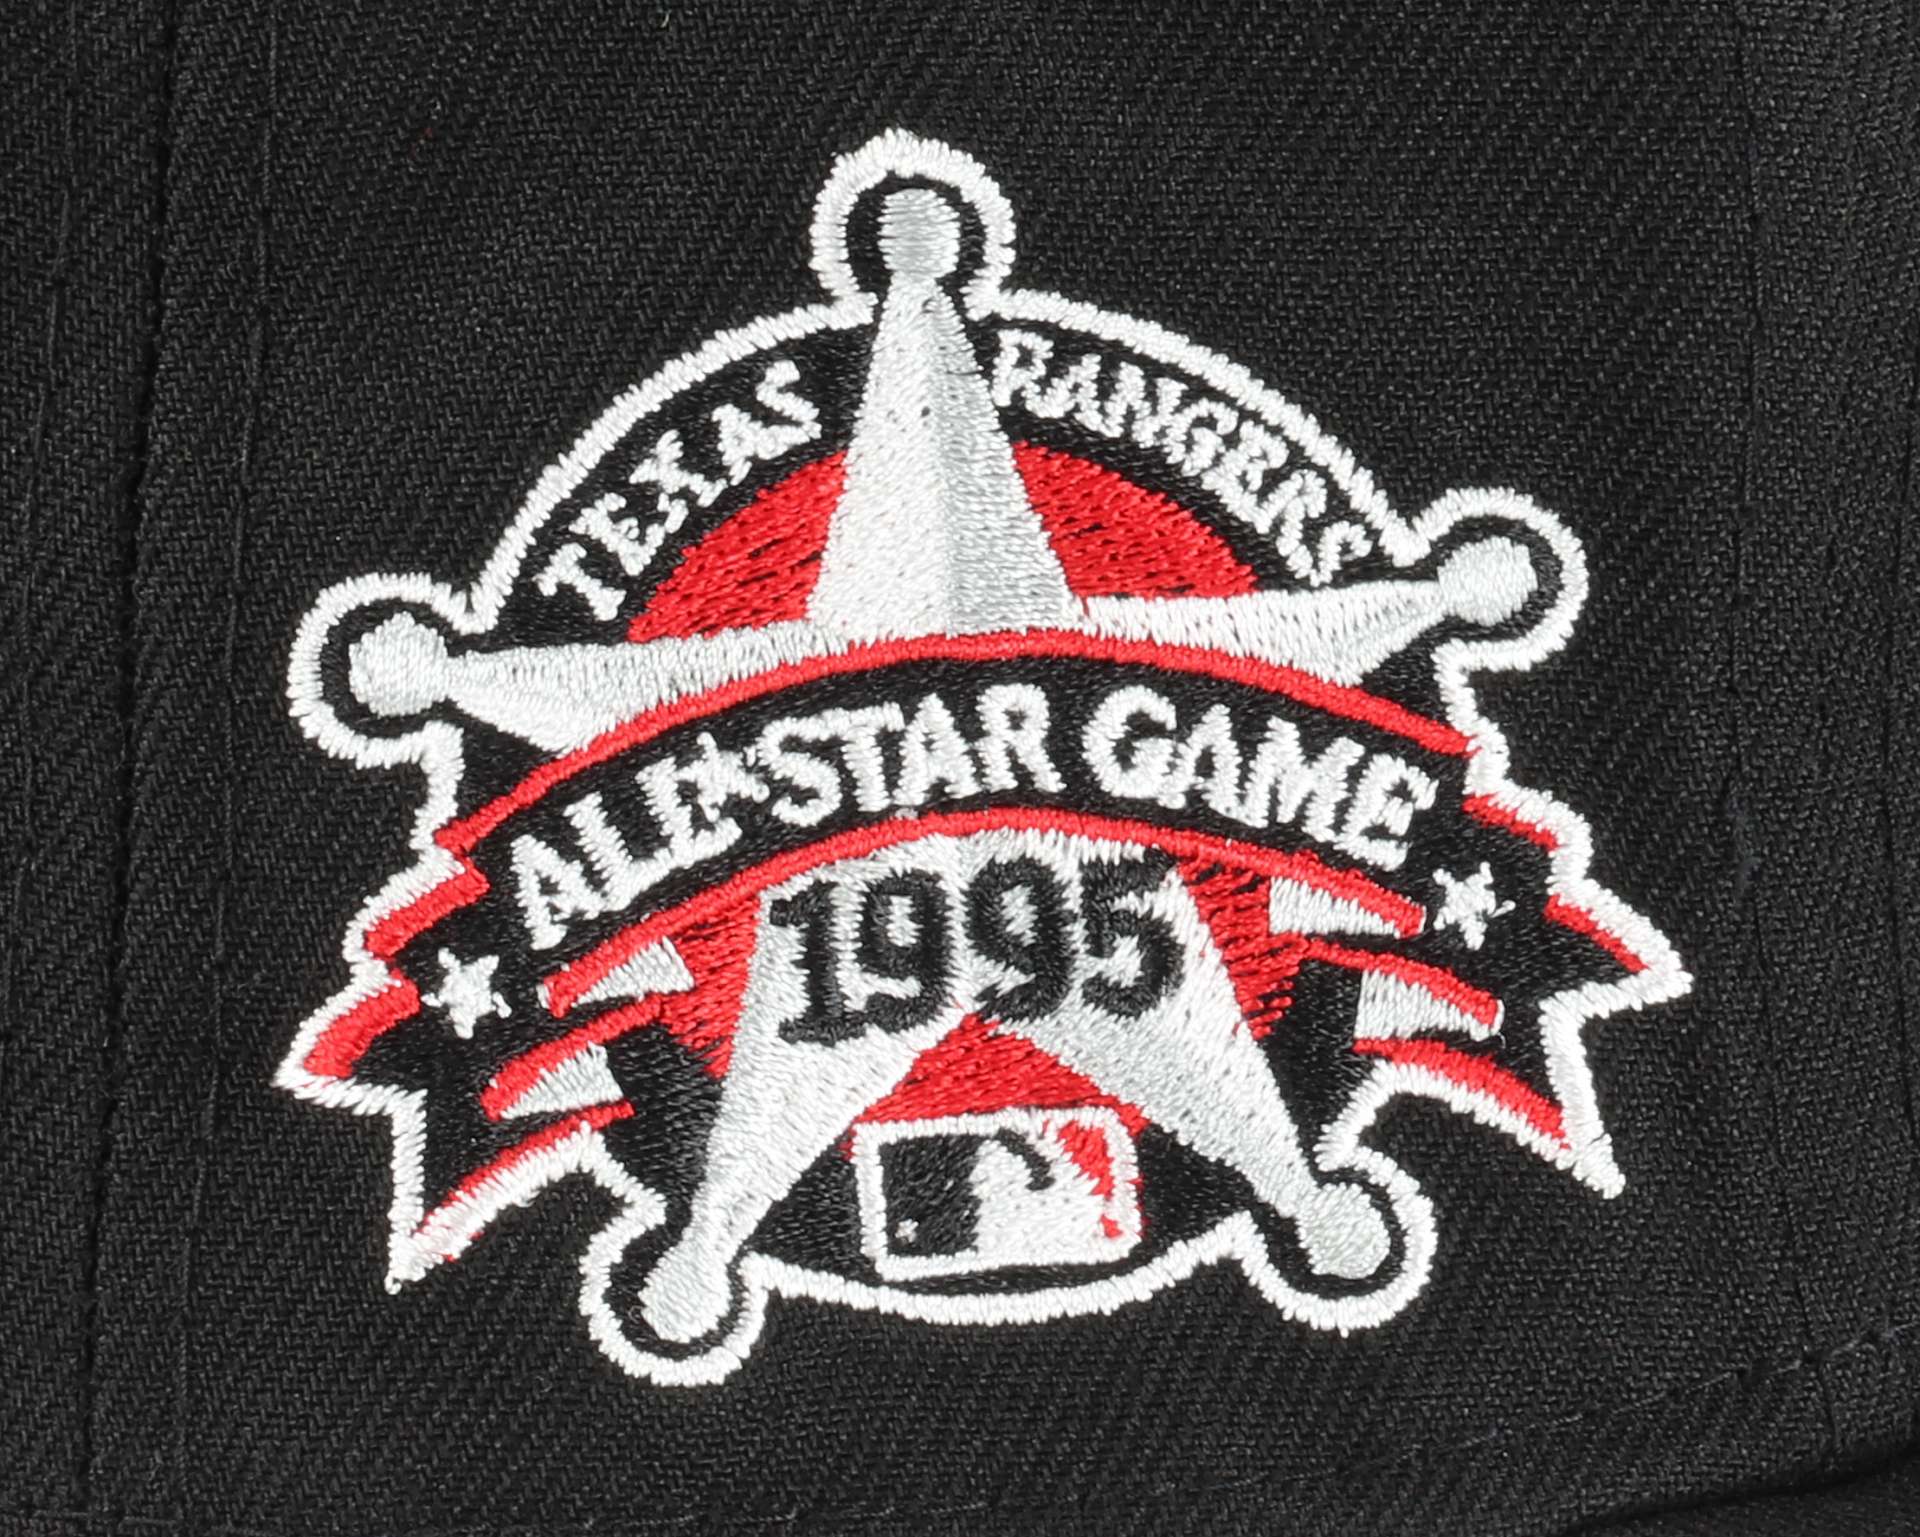 Texas Rangers MLB Side Patch All-Star Game 1995 Black 59Fifty Basecap New Era